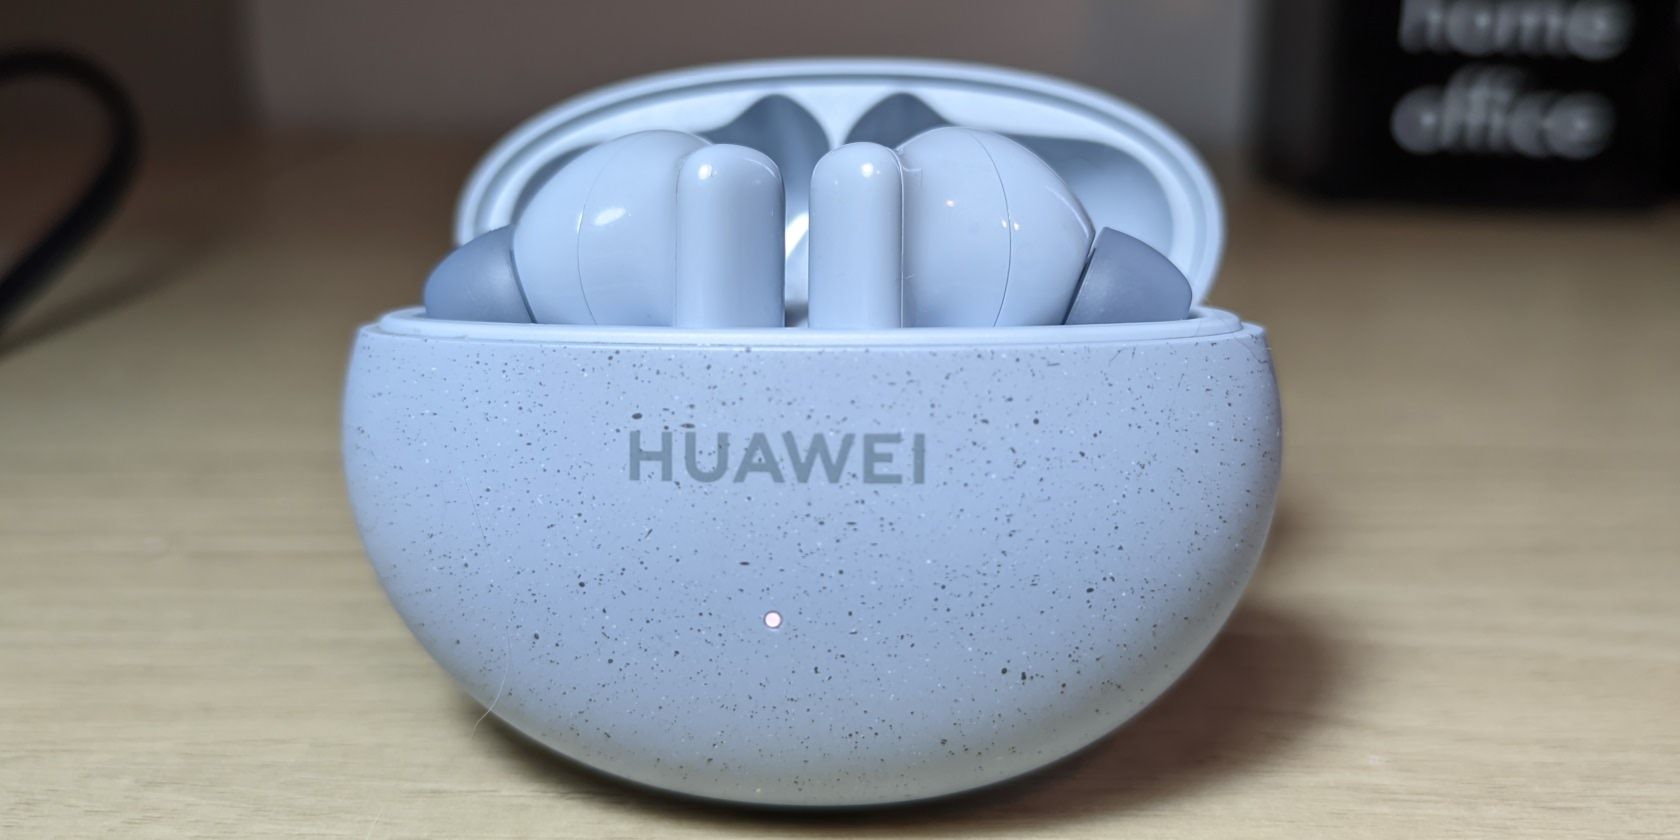 More live shots of Huawei FreeBuds 5 shows two beautiful colors